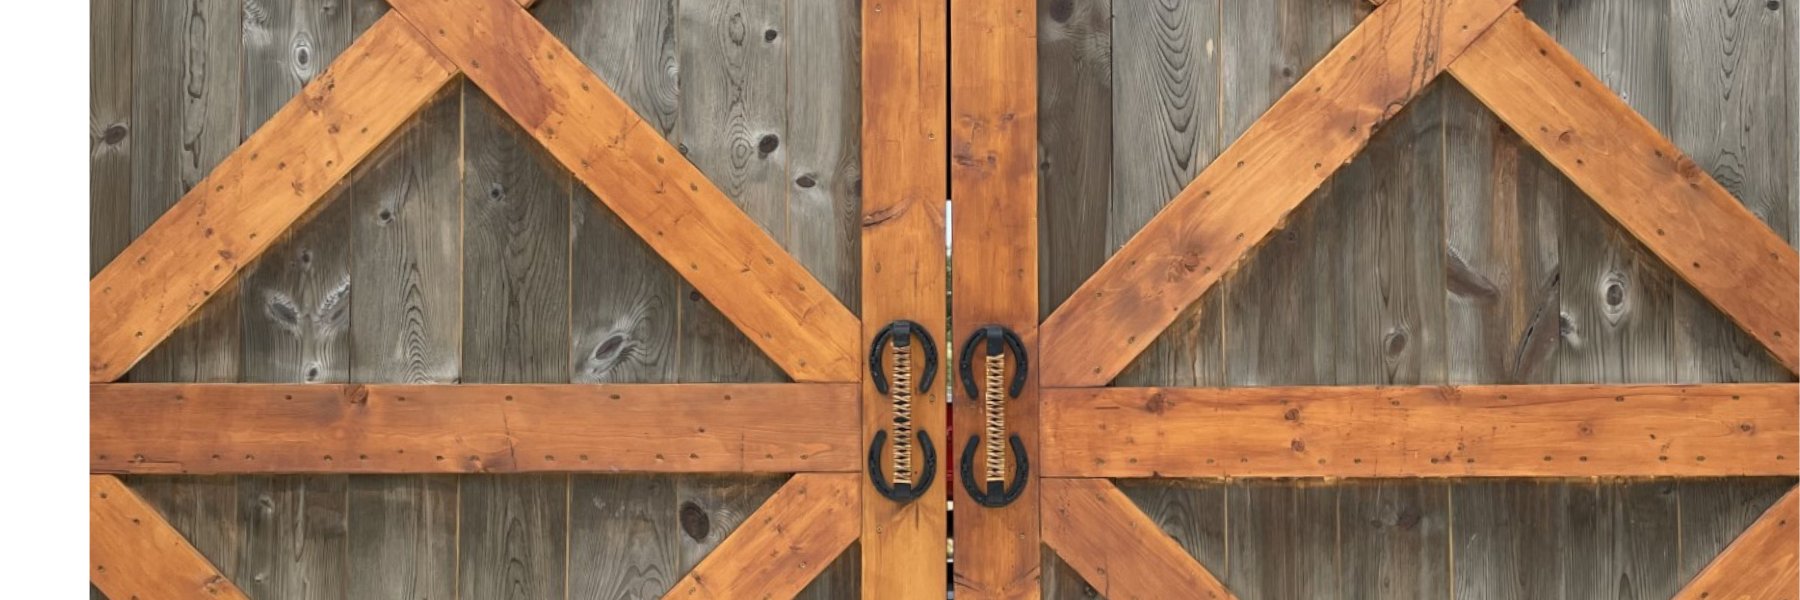 Equestrian Mudrooms: Design Inspiration - STABLE STYLE